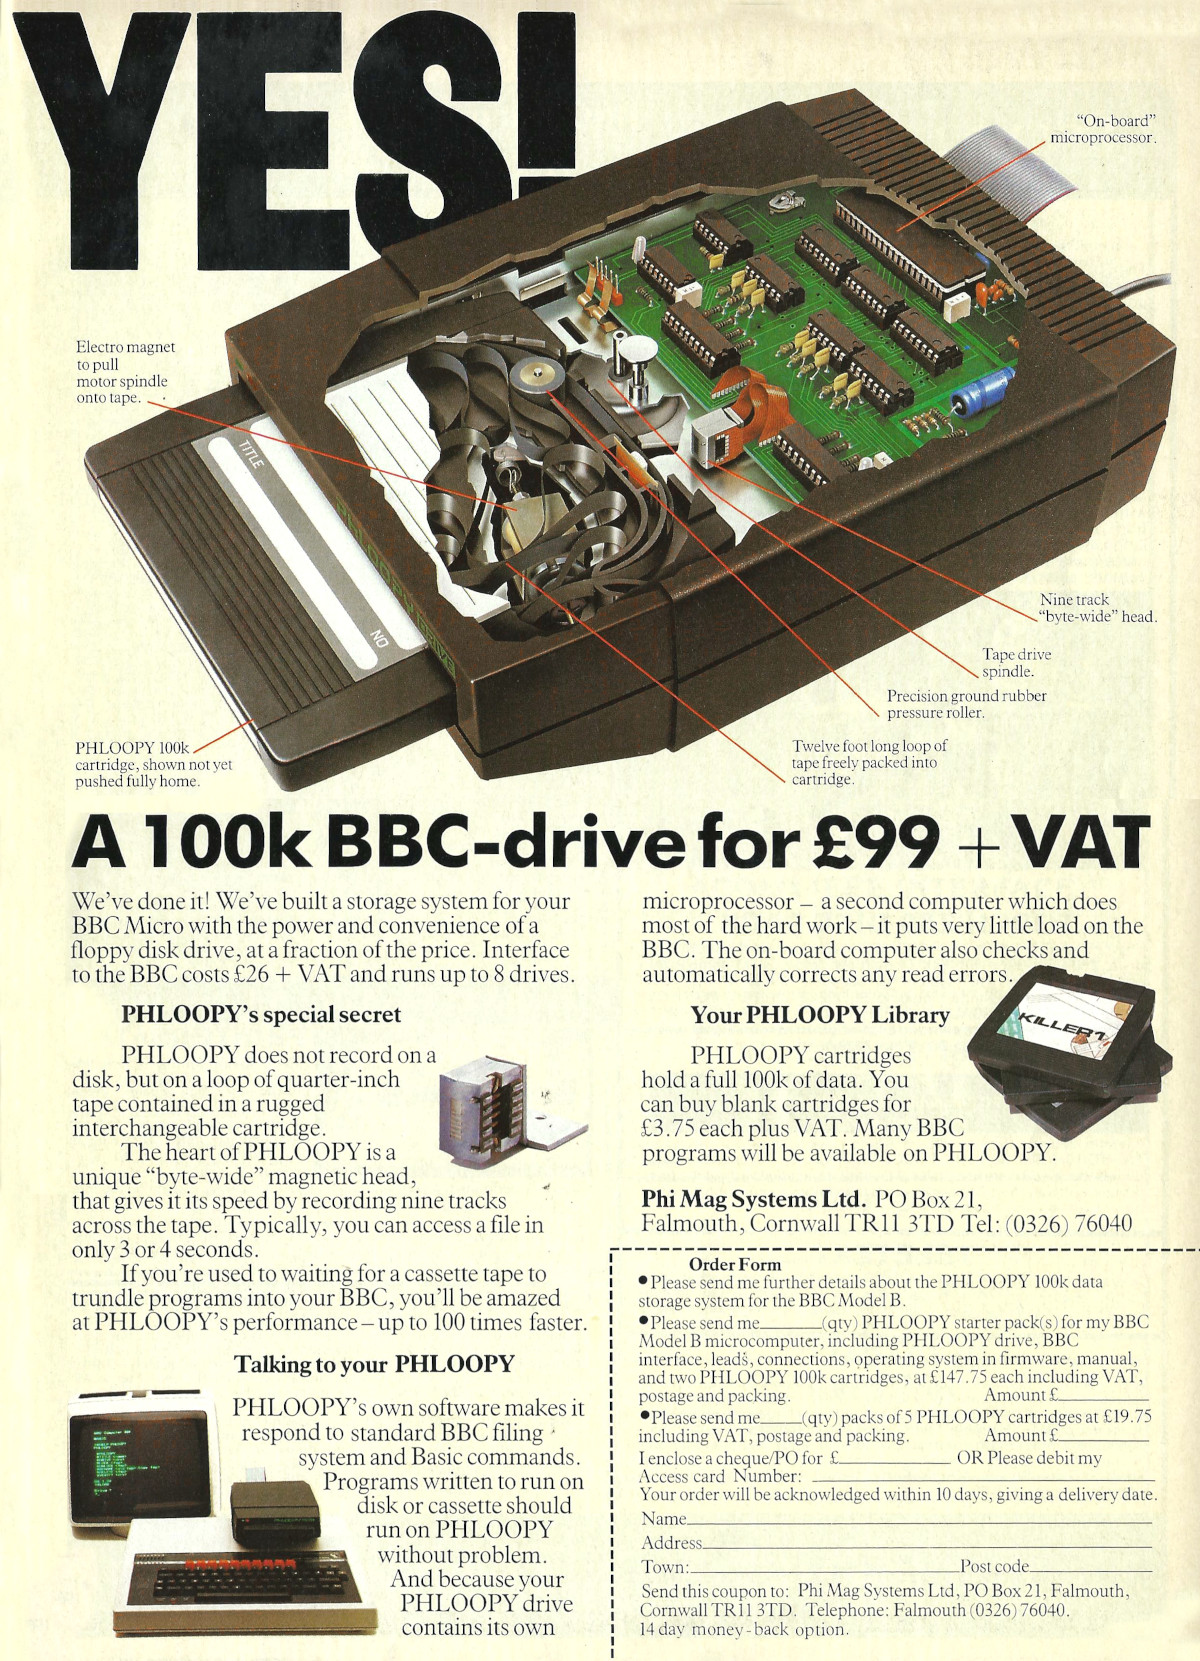  Phi Mag Systems' Phloopy - quite similar to Sinclair's Microdrive, but aimed at the BBC Micro. From Acorn User, September 1984